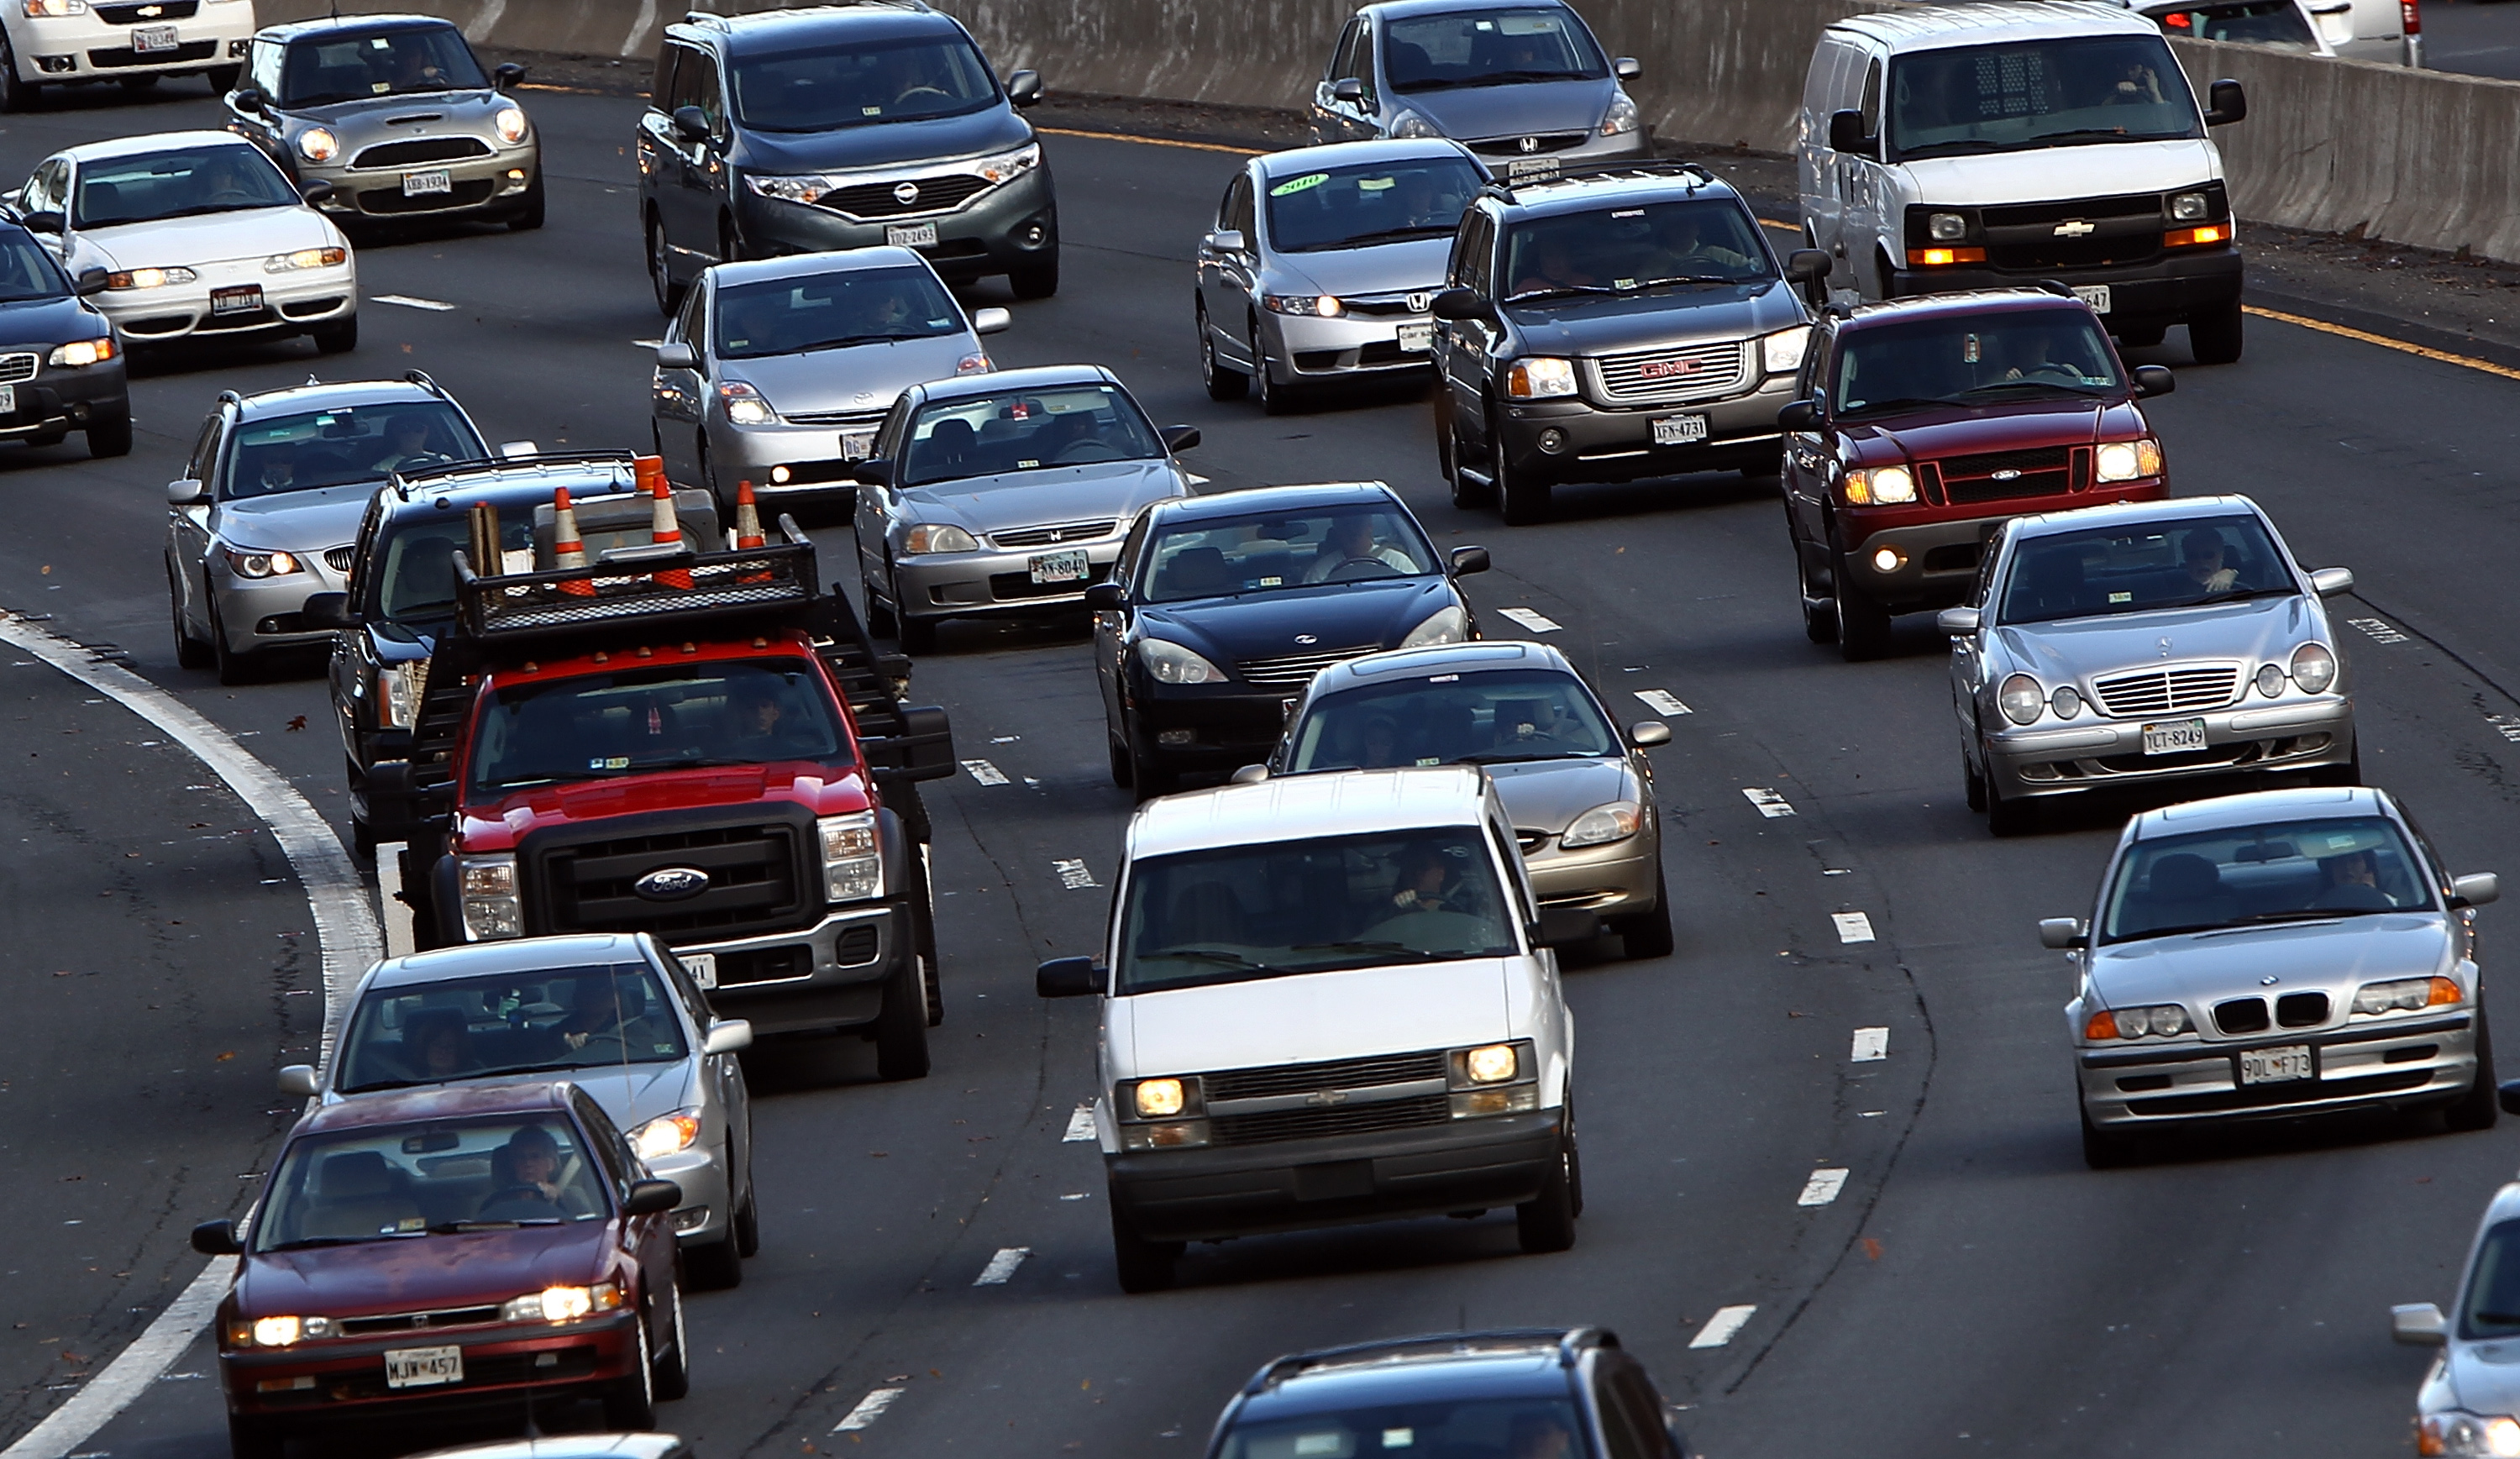 Traffic converges on highway I-495 South just west of the nation's capital on one of the busiest travel days of the year November 23, 2011 in McLean, Virginia. (Win McNamee&mdash;Getty Images)